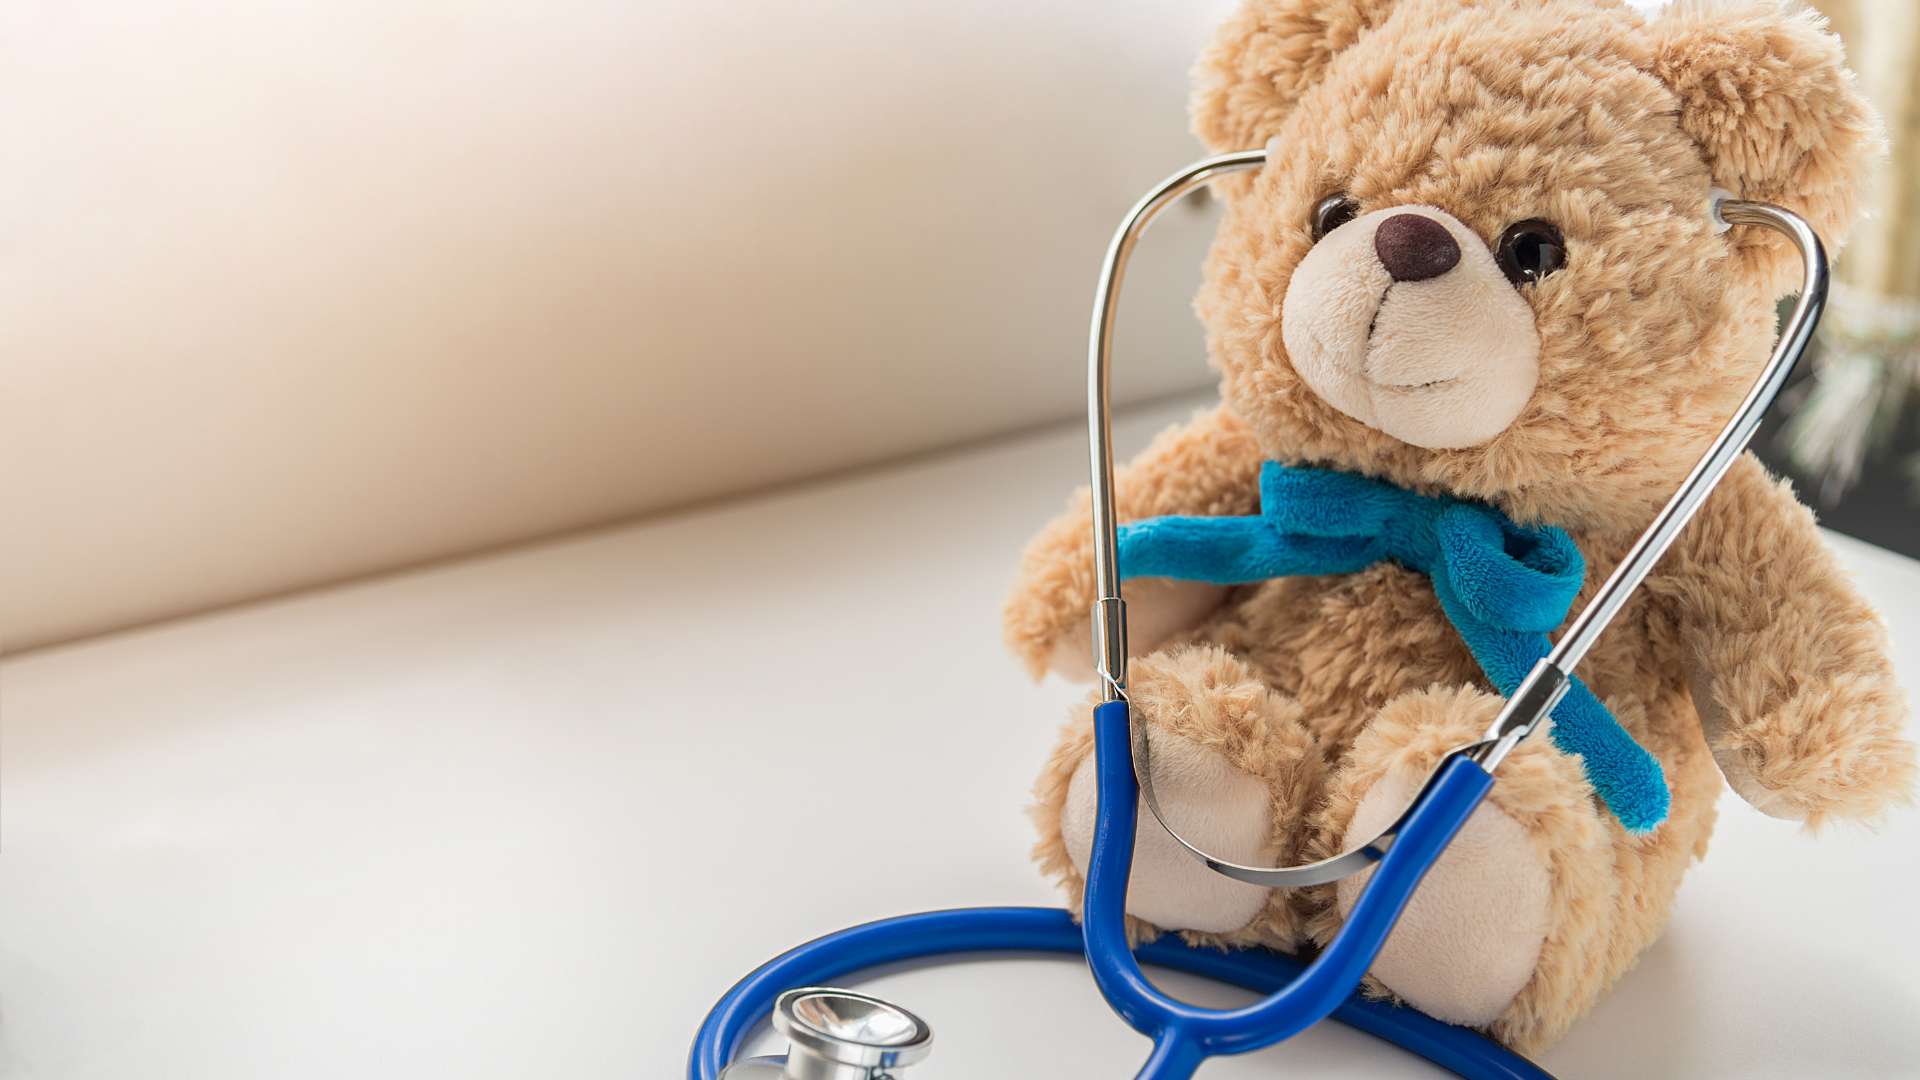 a brown teddy bear with a blue bow sits on a table wearing a stethoscope